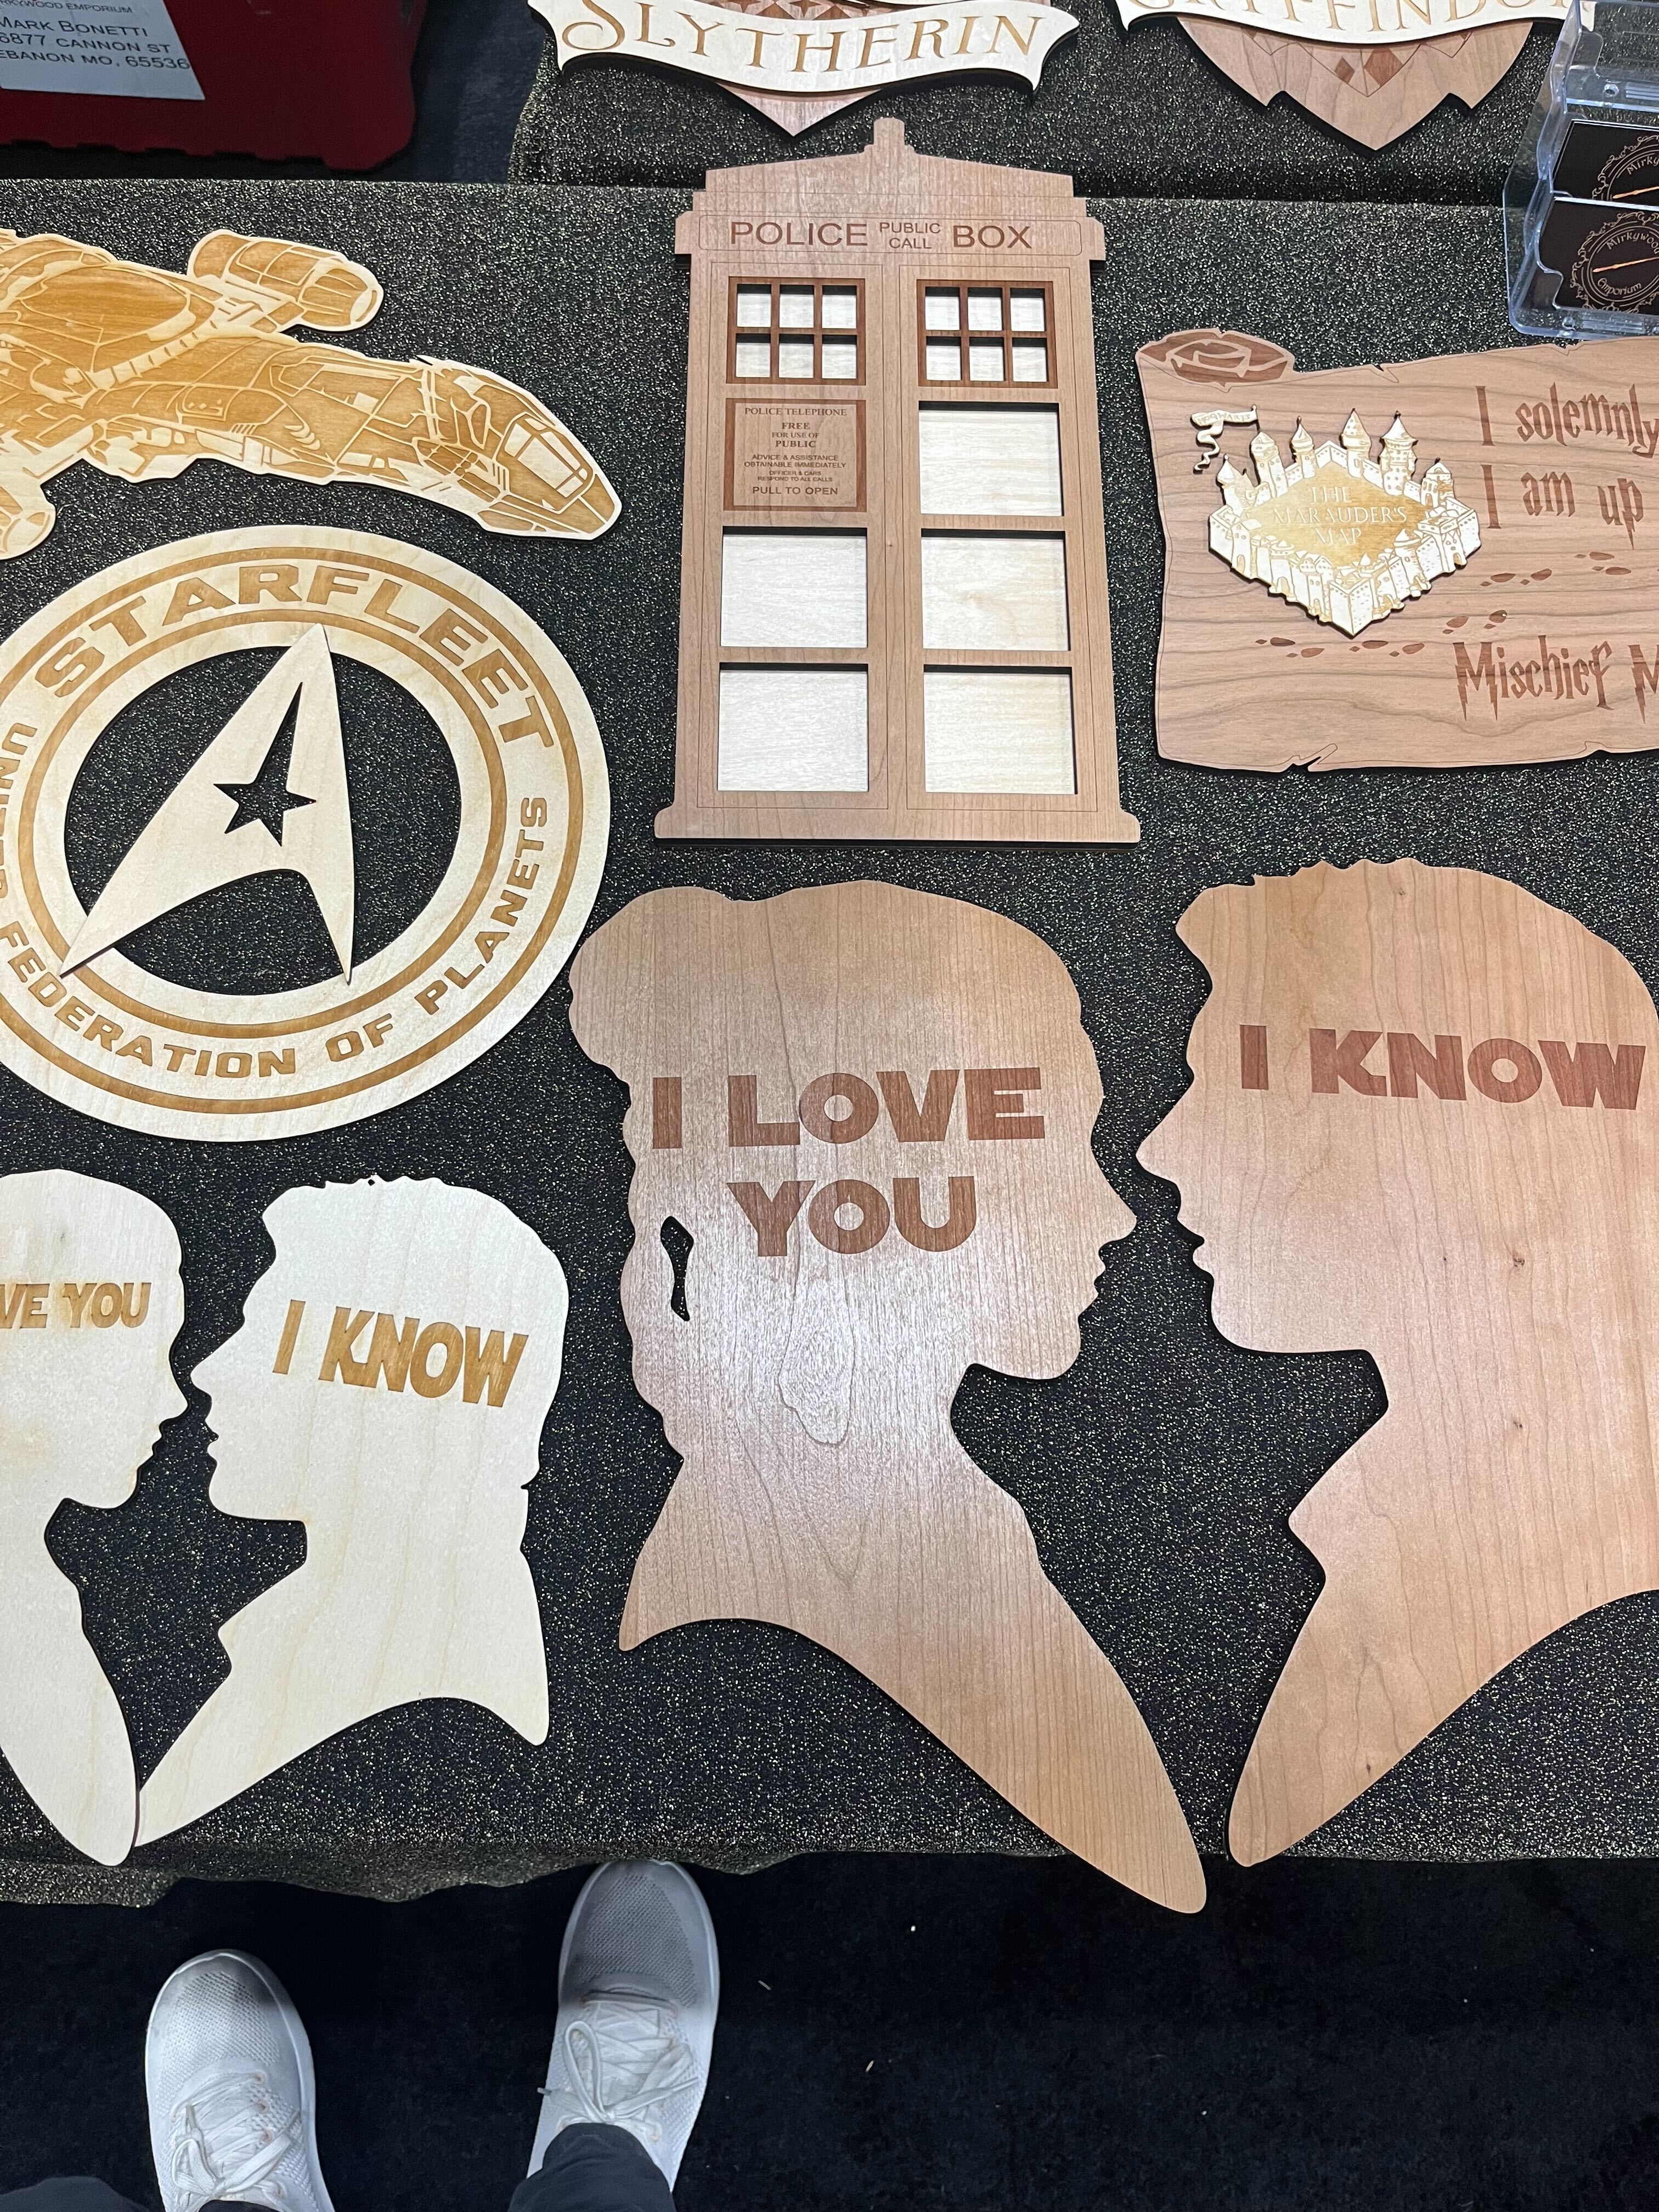 These sweet wood carvings, hitting all the major fandoms. 